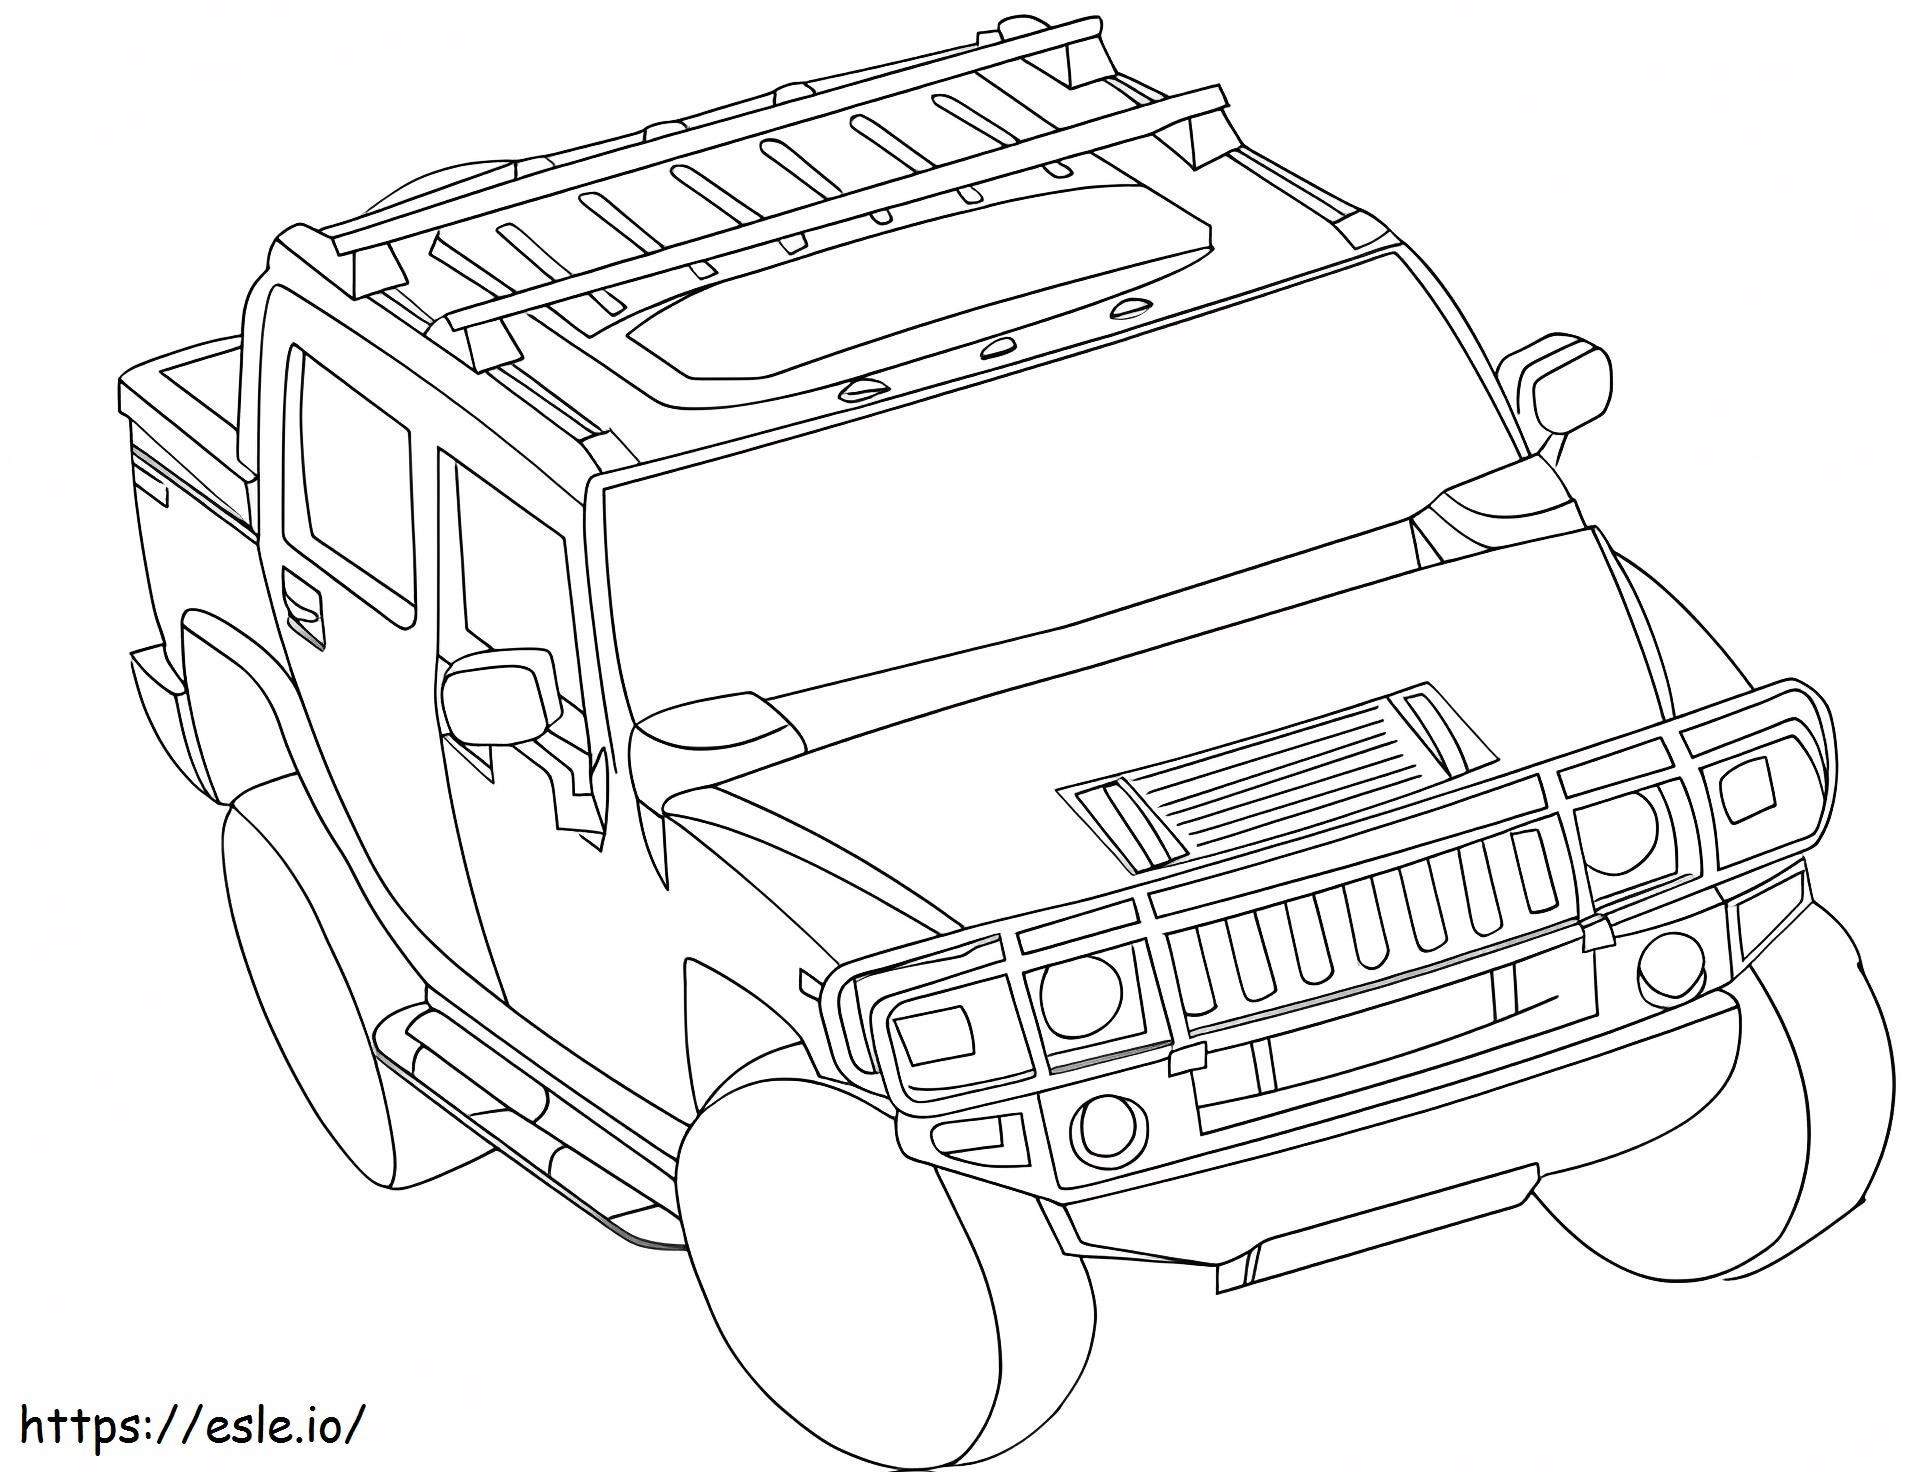 1527152140 Hummer H3 coloring page